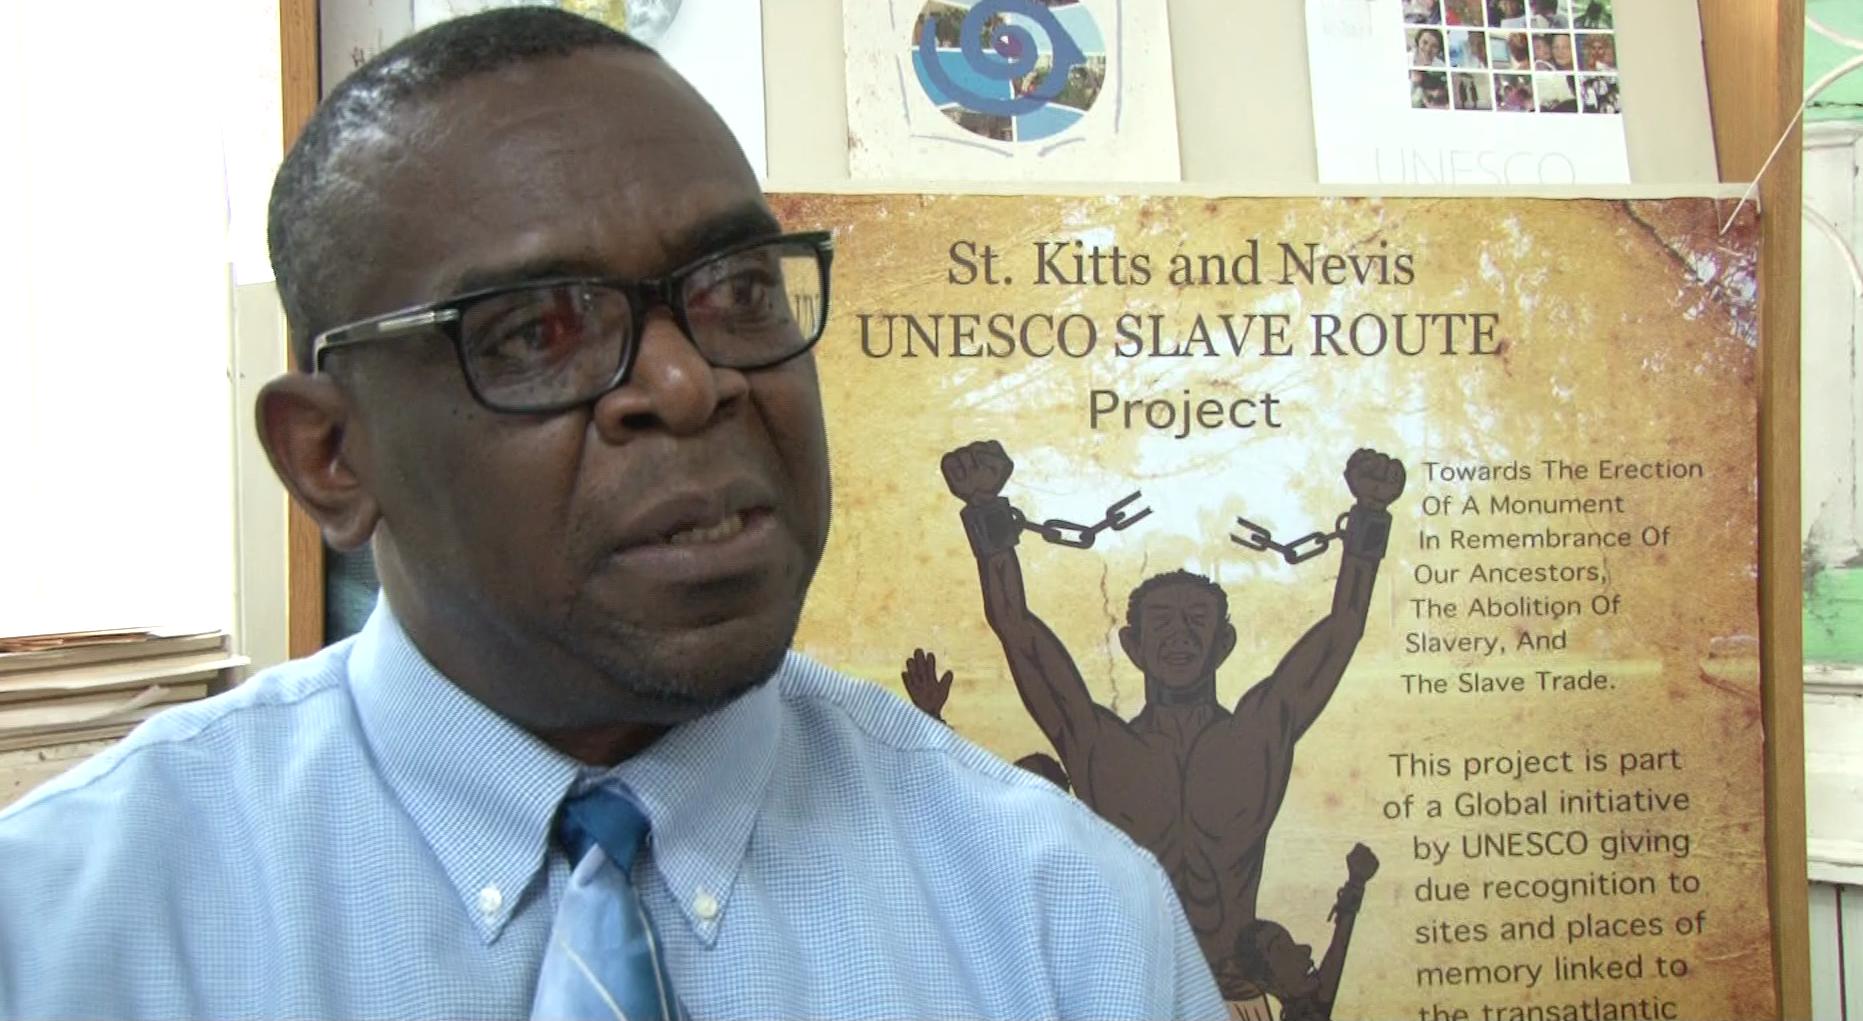 Mr. Antonio Maynard, Secretary General of the St. Kitts and Nevis National Commission for UNESCO